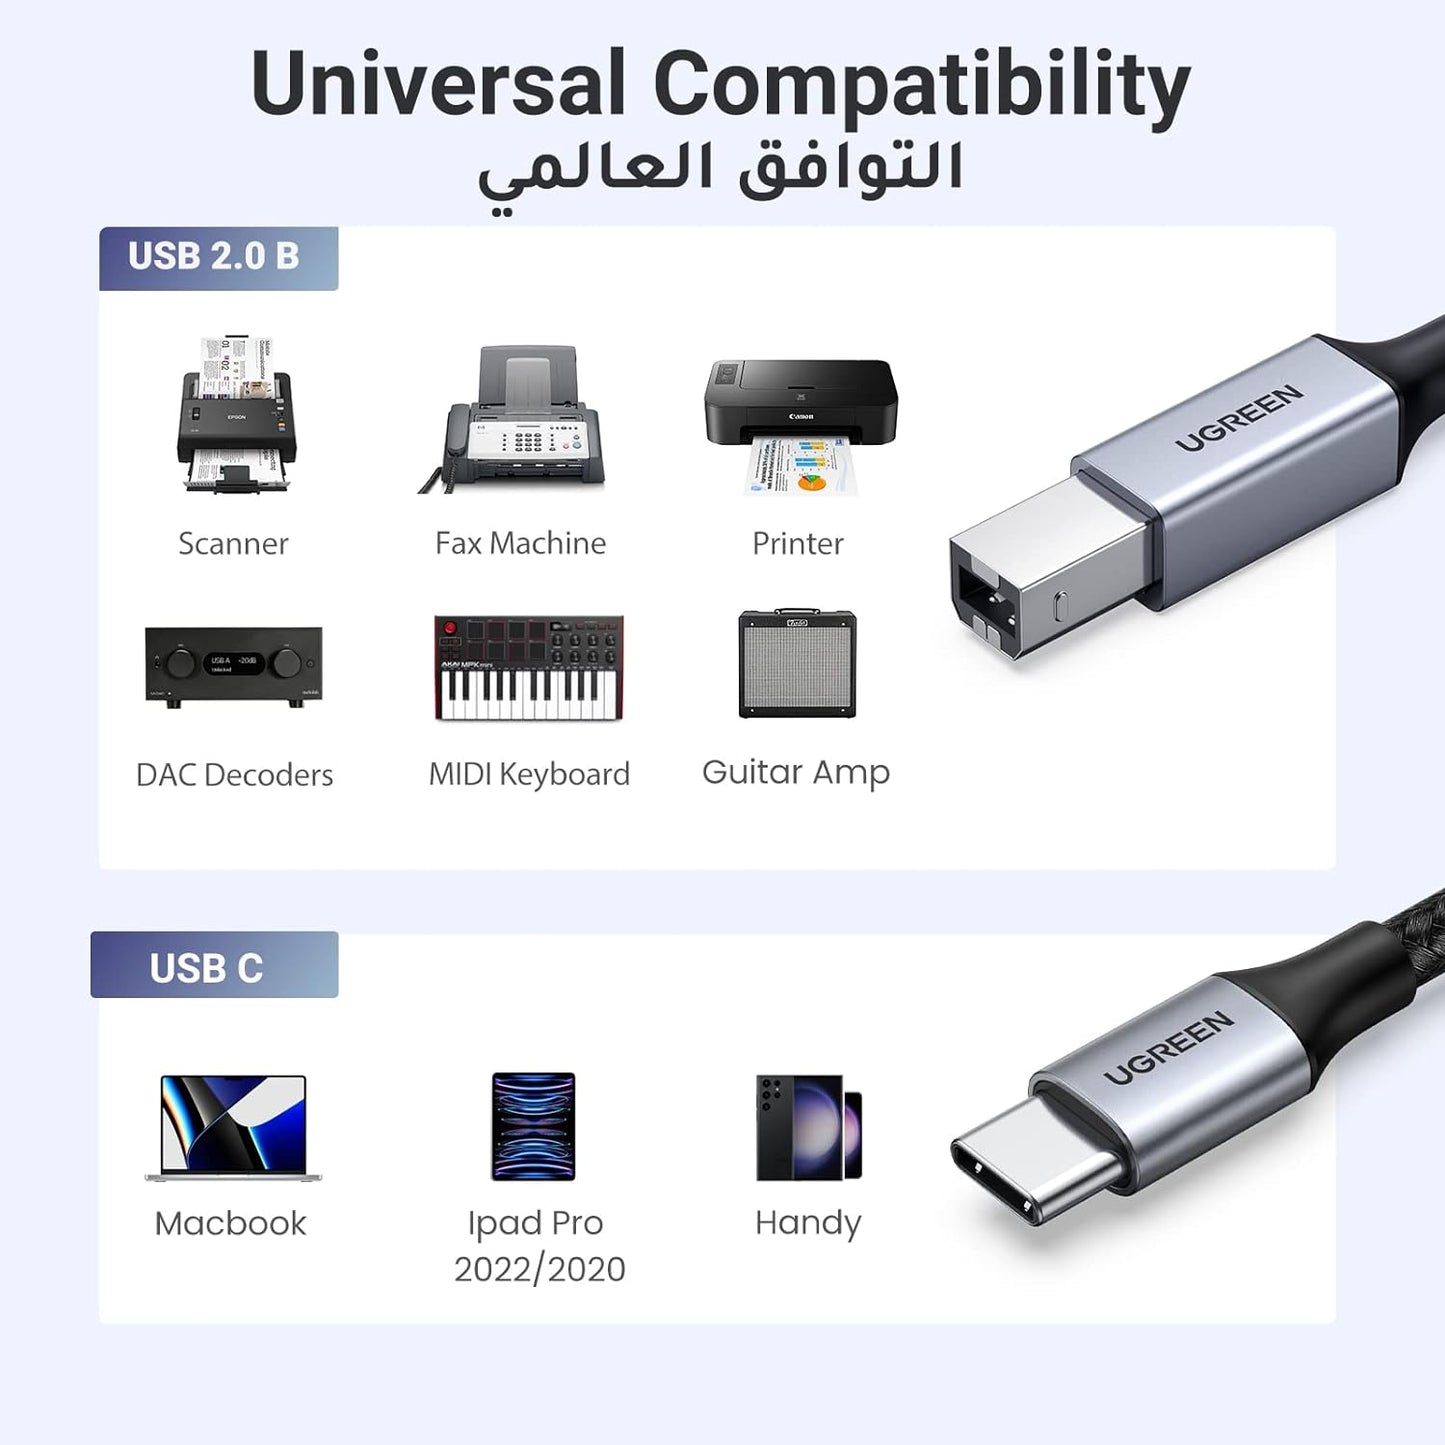 UGREEN USB C to B Cable, USB C Printer Cable Type C Male to USB B Male Lead Compatible with New MacBook,Dell XPS 15 13,HP Spectre X2,Google Chromebook Pixel,Microsoft Surface Pro- 1M